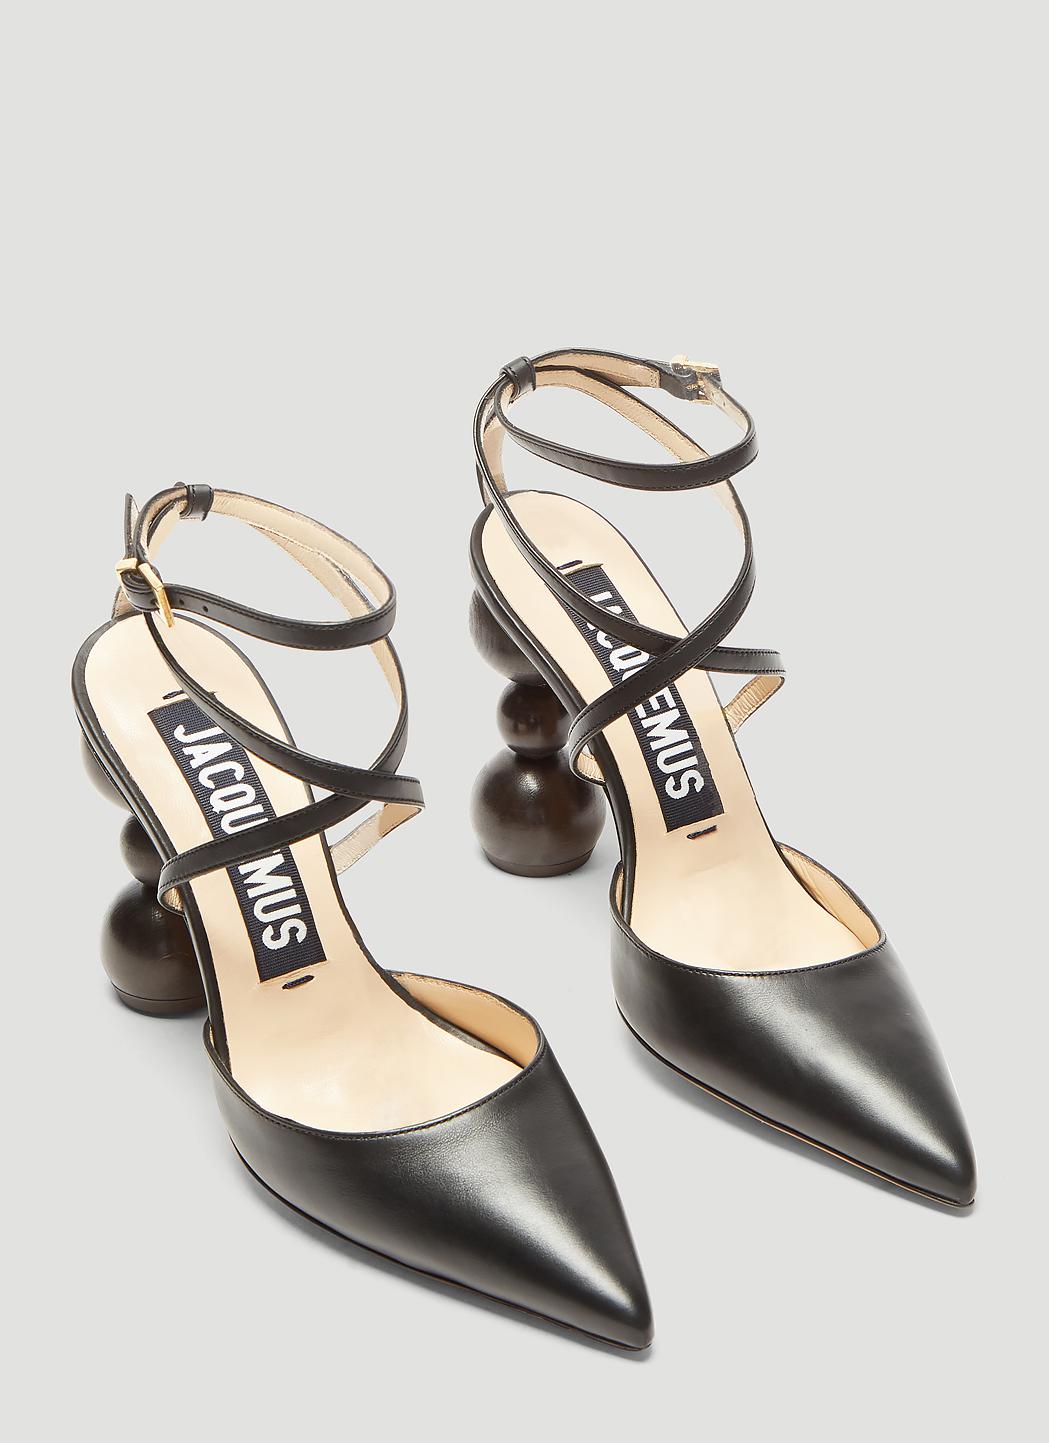 Jacquemus Leather Les Chaussures Camil D'orsay Pumps in Black - Lyst